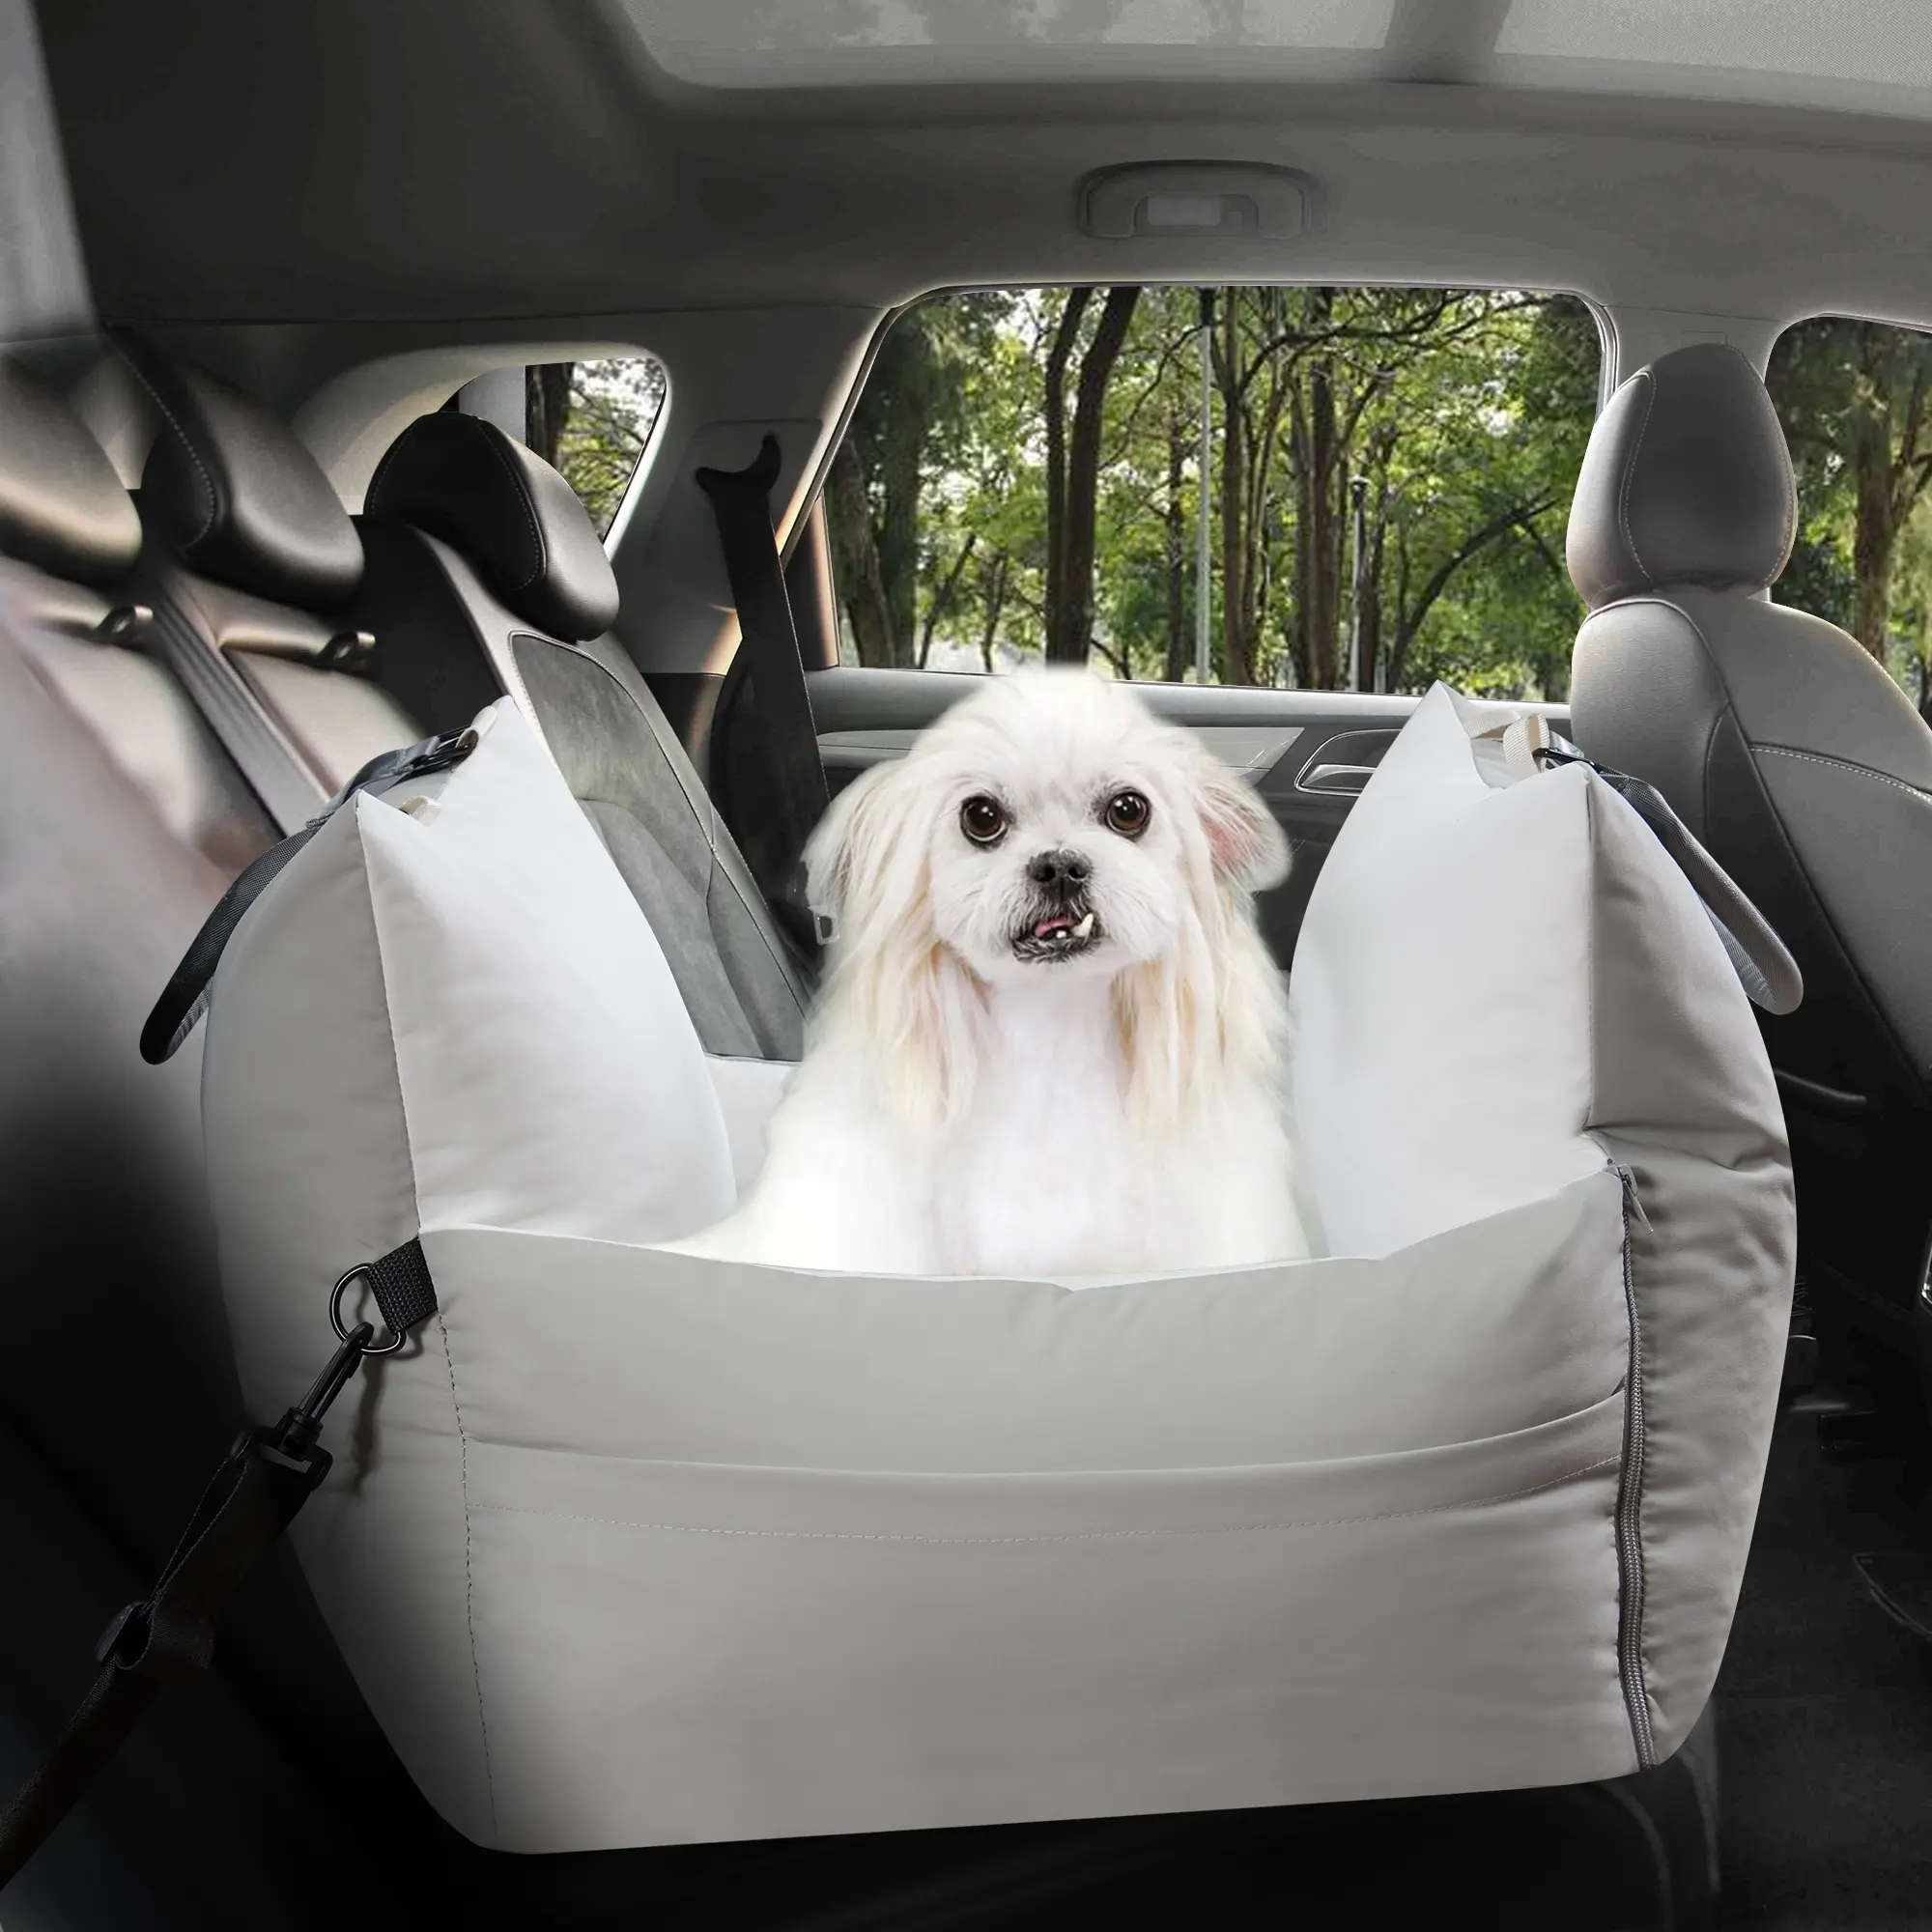 Luxury Dog Car Seat Bed Portable Travel Pet Bed Dog Booster Seat with Waterproof cover and leashes